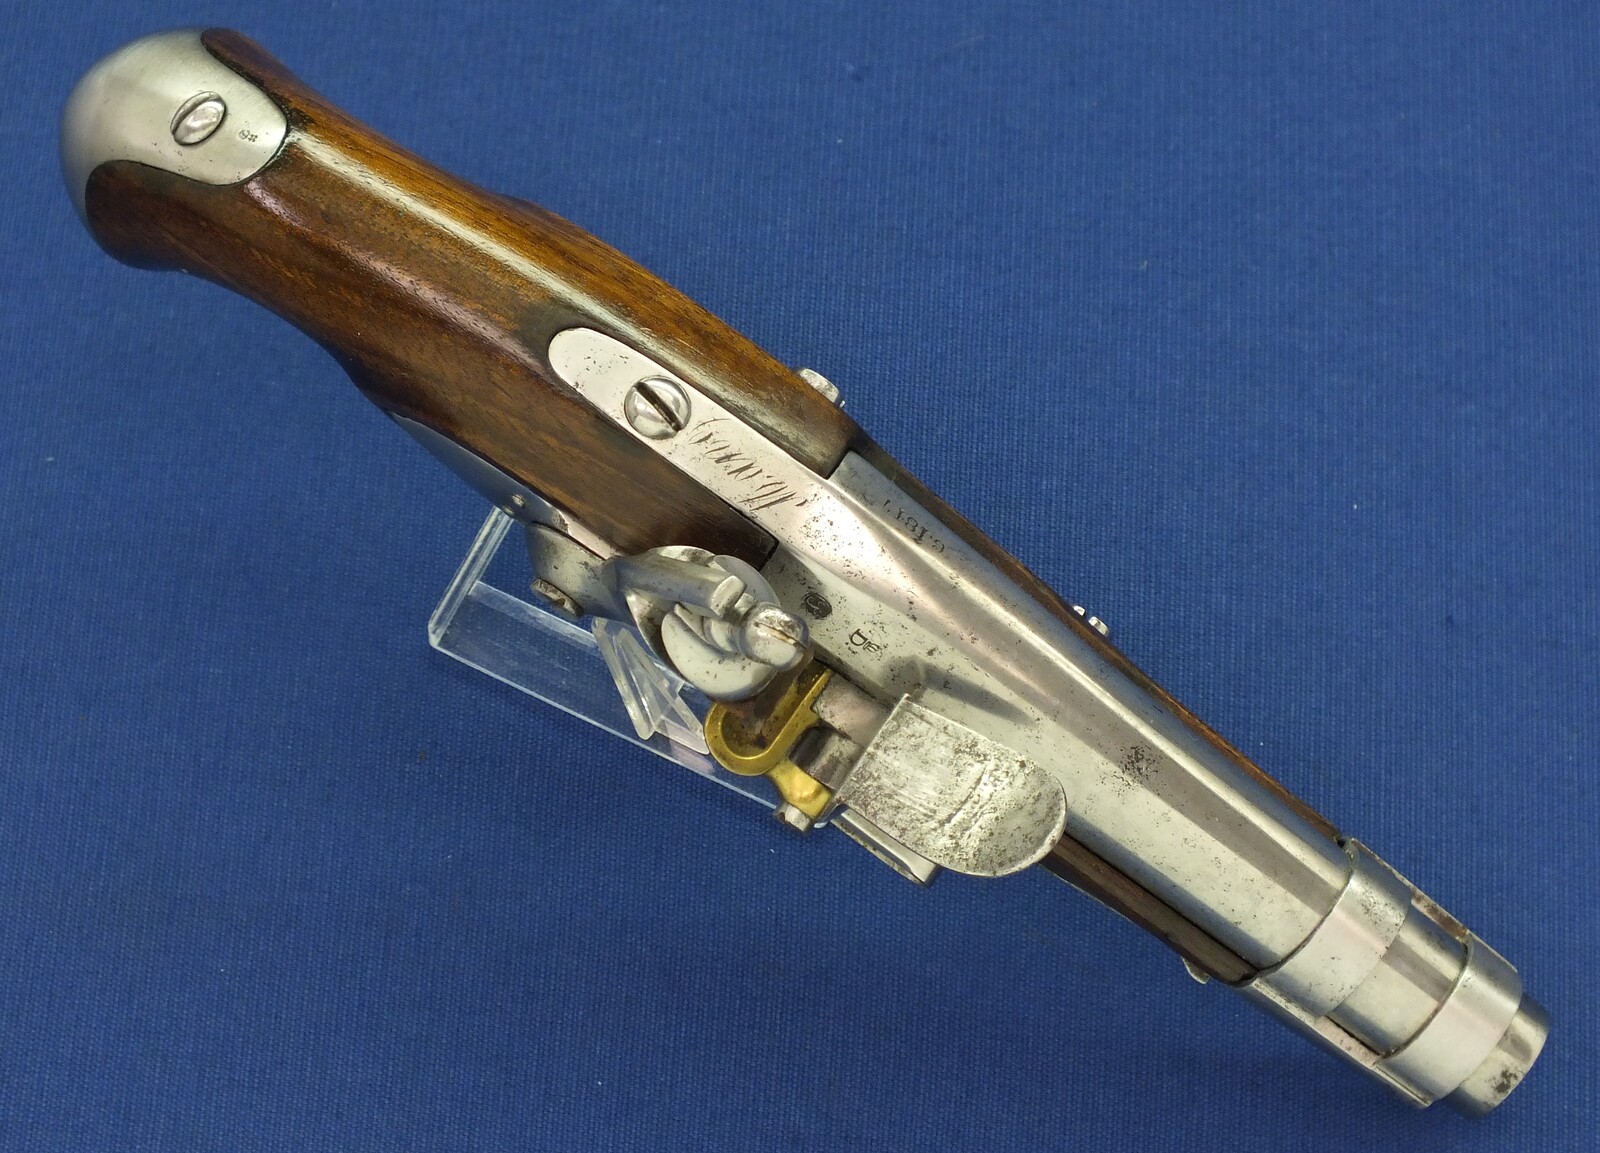 An antique 19th century French Model AN9 Gendarmerie Flintlock pistol. Lock Signed: Manuf. Royal de Maubeuge. Caliber 15,2mm, length 25,5cm. In very good condition. Price 1.700 euro